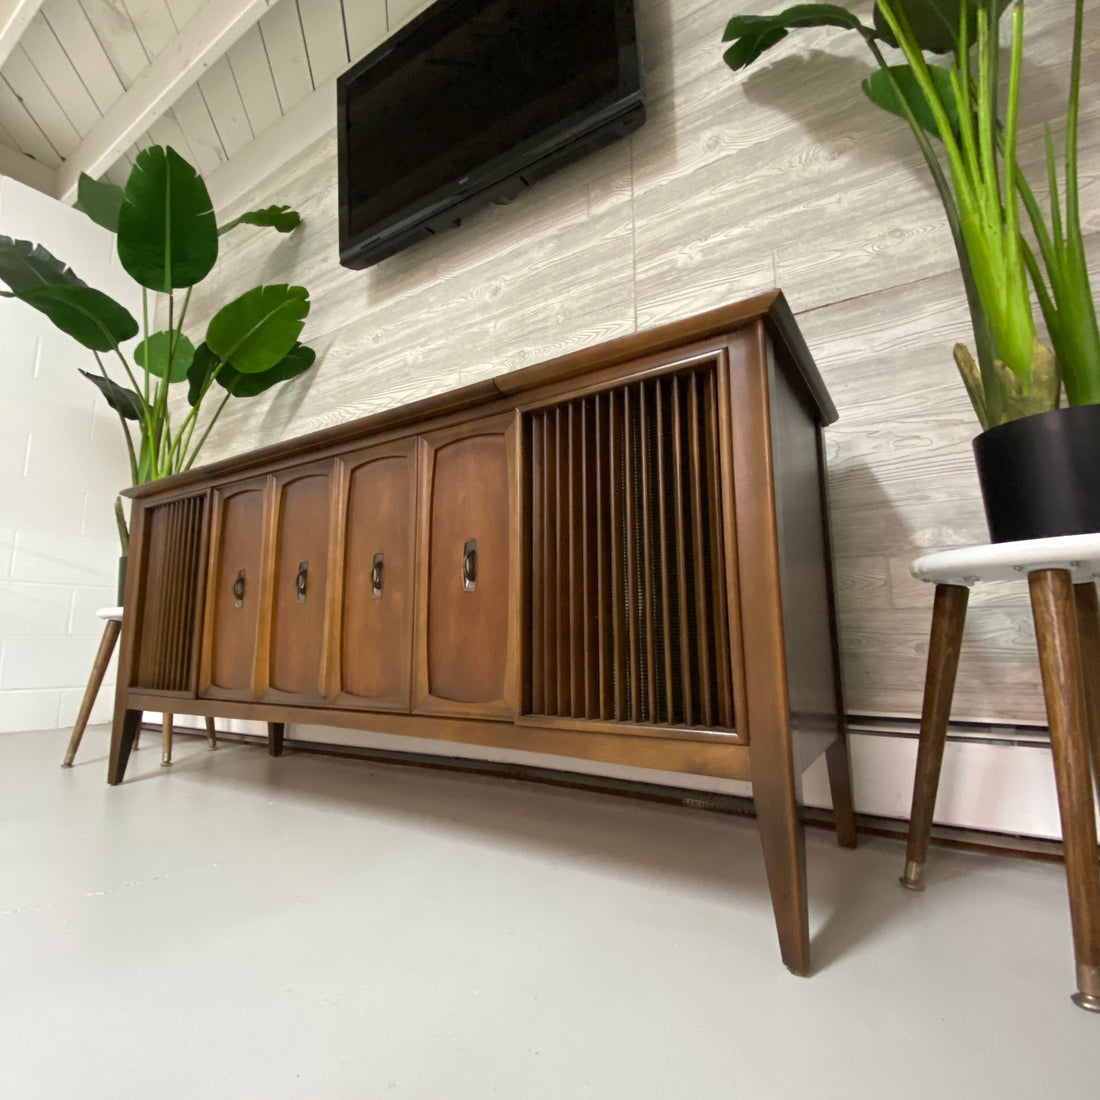 The Vintedge Co™ - ZENITH 60s Mid Century Stereo Console Record Player AM FM Bluetooth Alexa